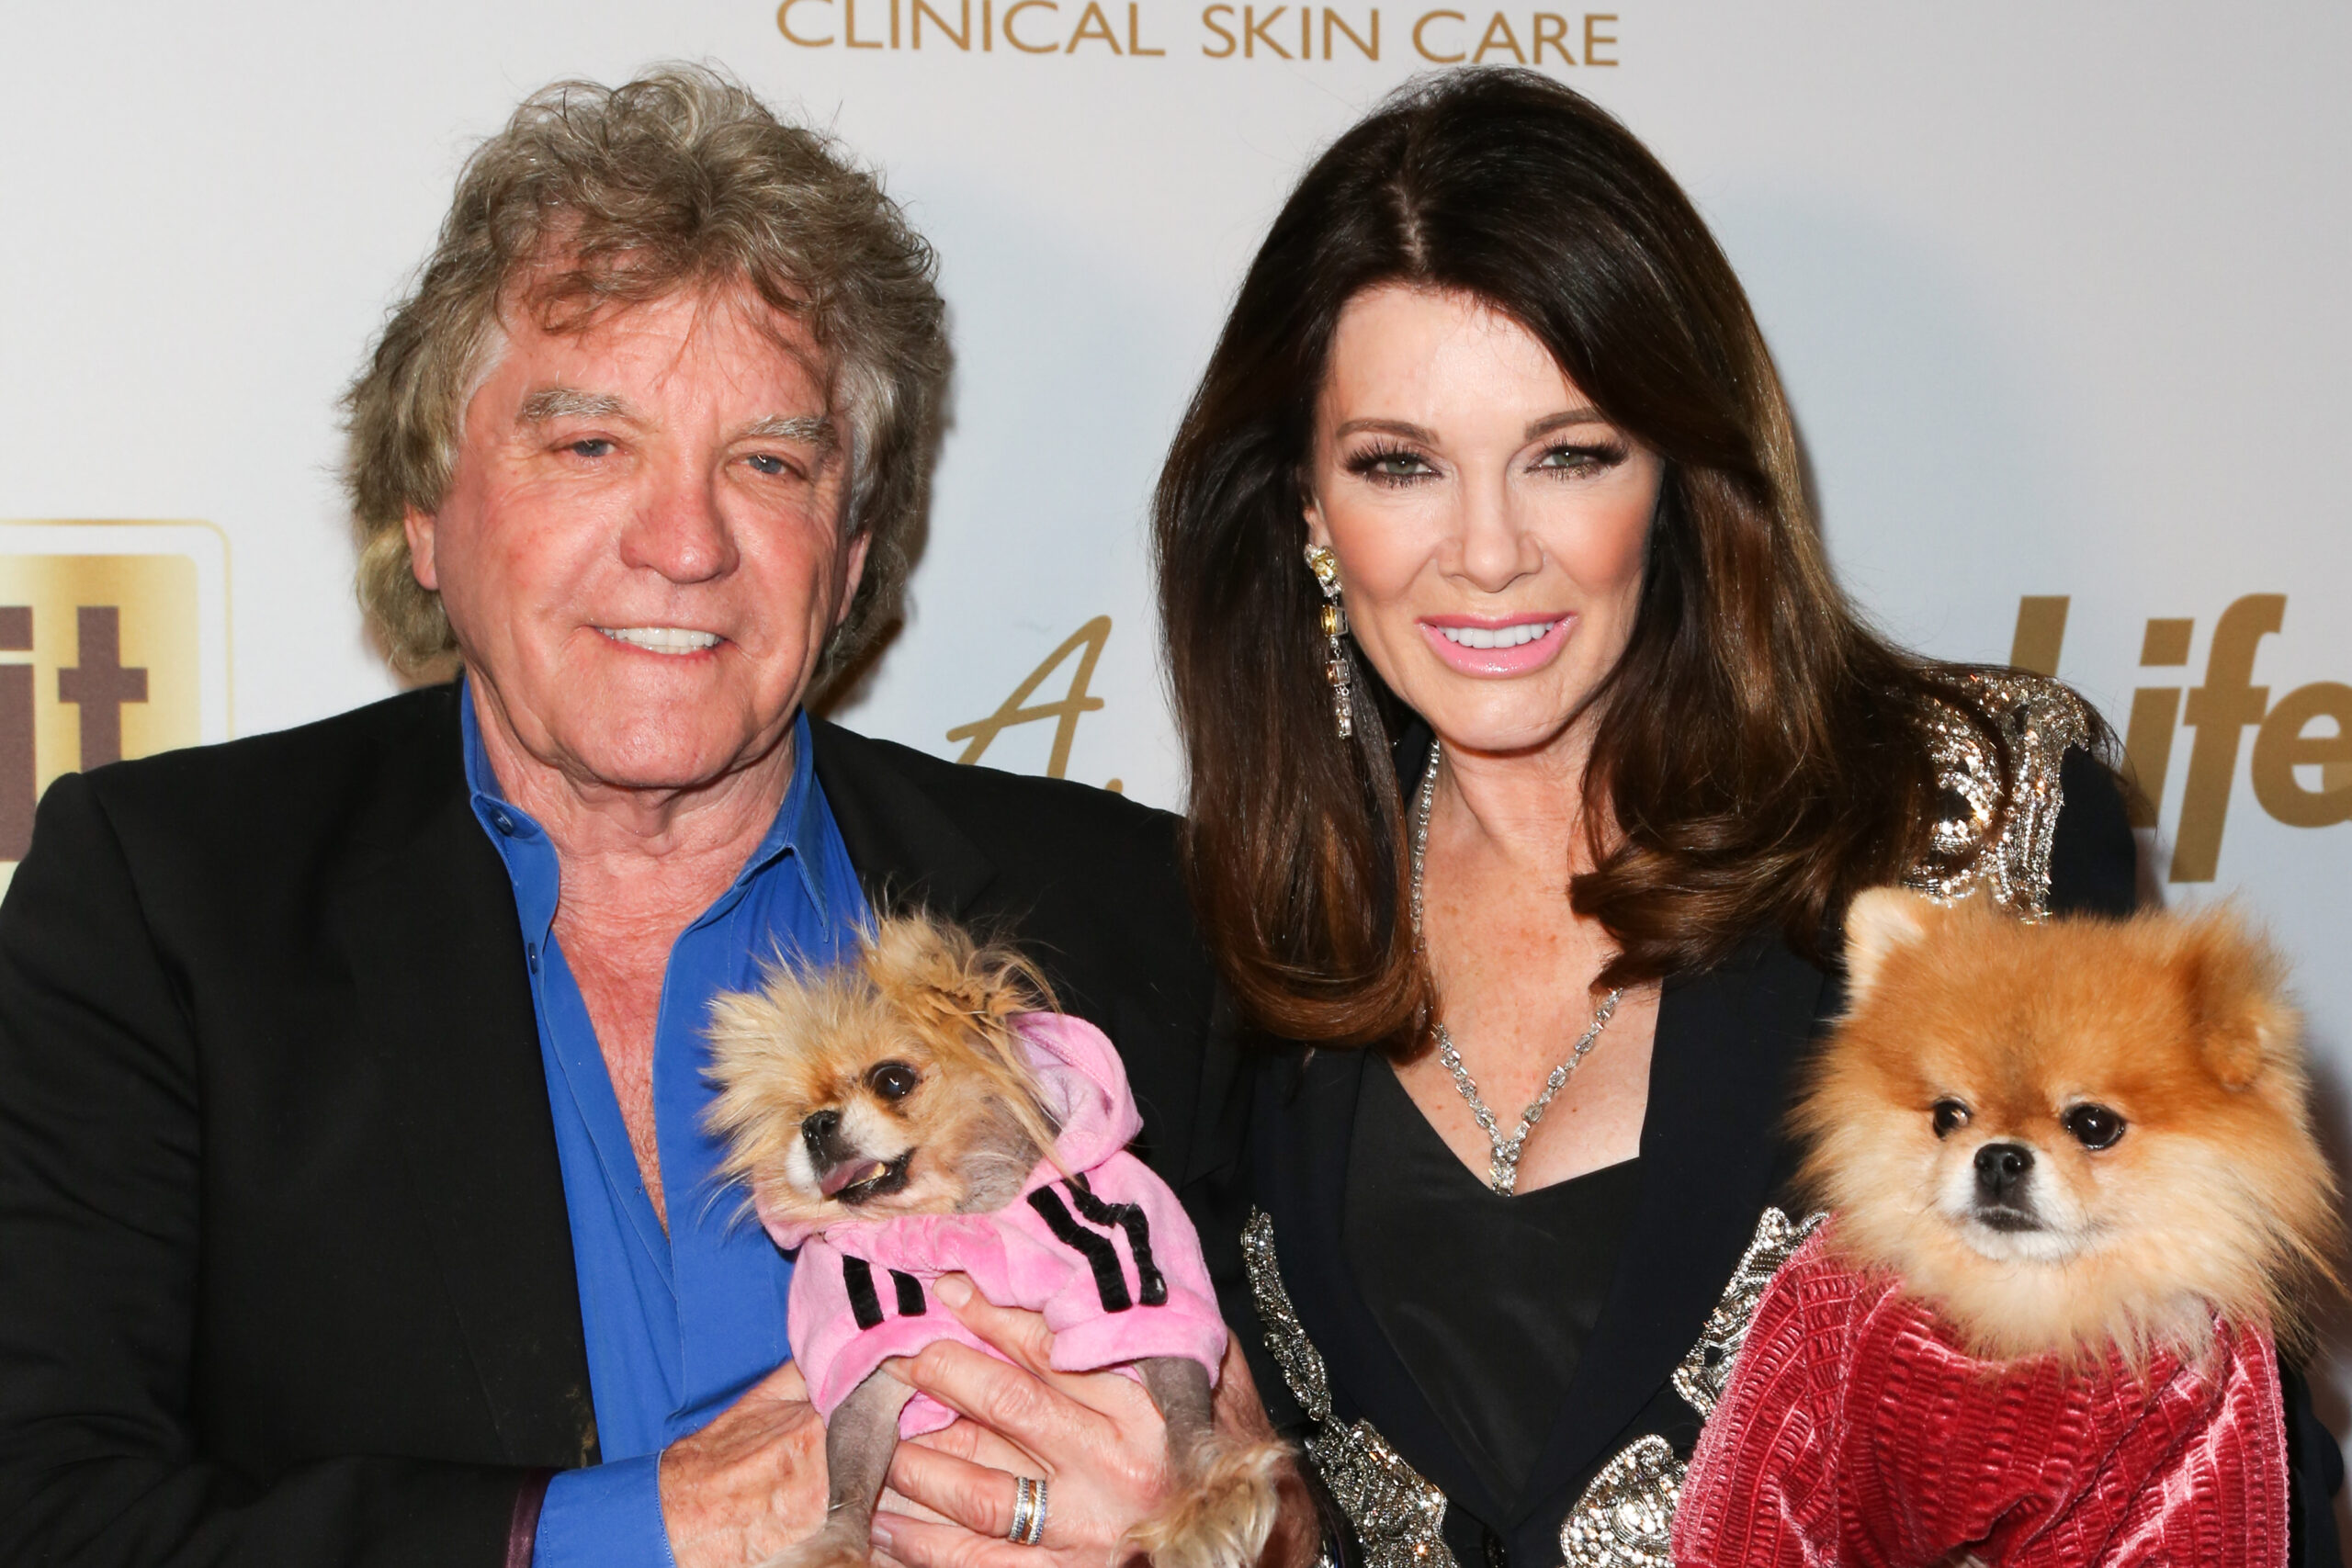 Ken Todd and Lisa Vanderpump walk the 2019 Grammy's red carpet with dogs Giggy and Harrison.